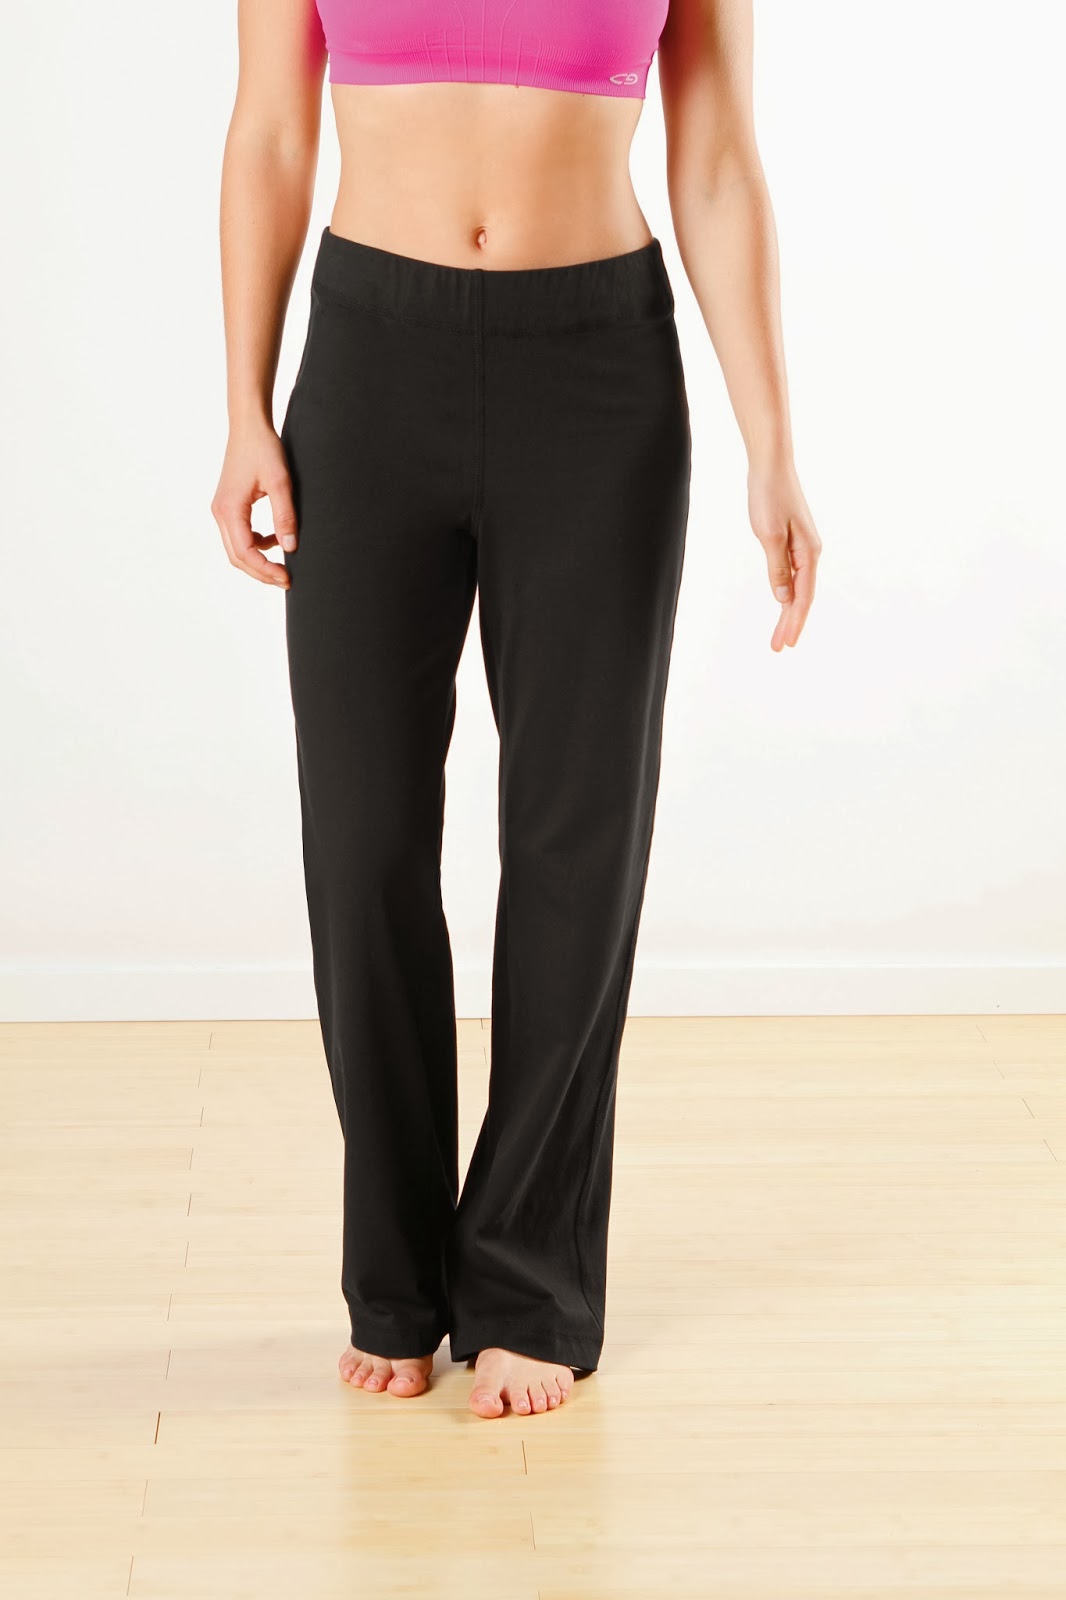 My Empty Nest: Organic Cotton Bootcut Pants From Gaiam